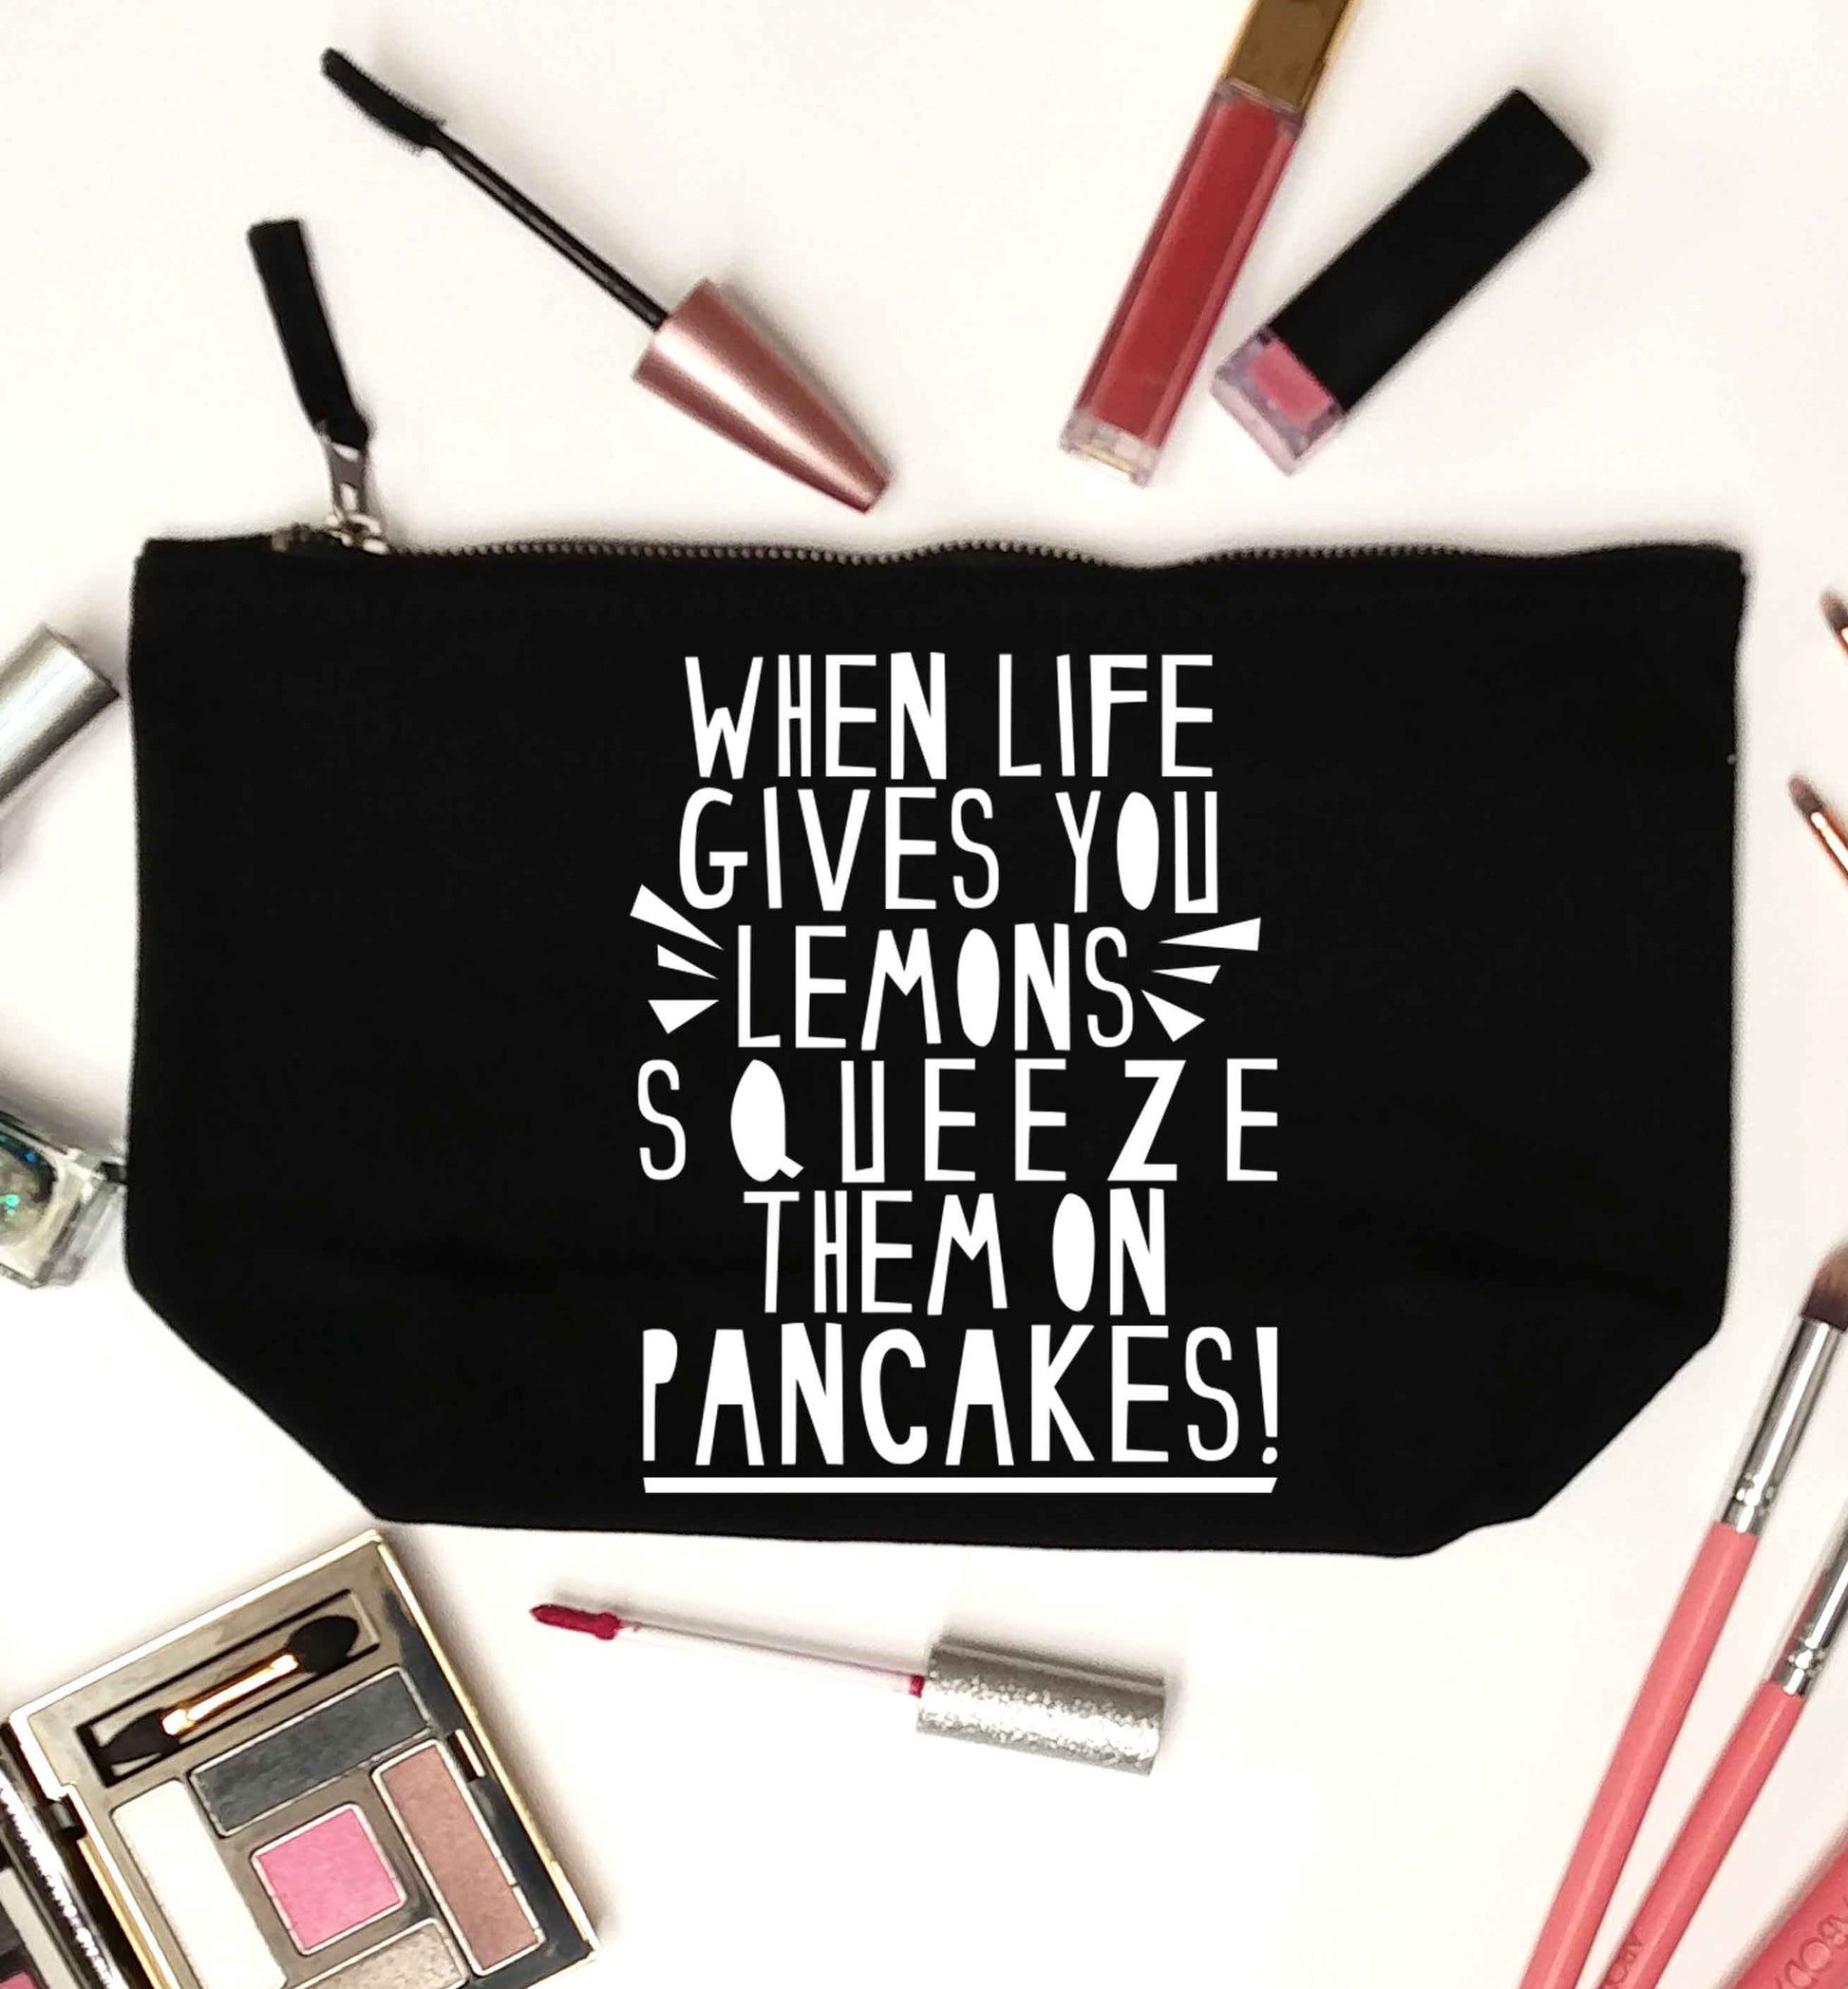 When life gives you lemons squeeze them on pancakes! black makeup bag